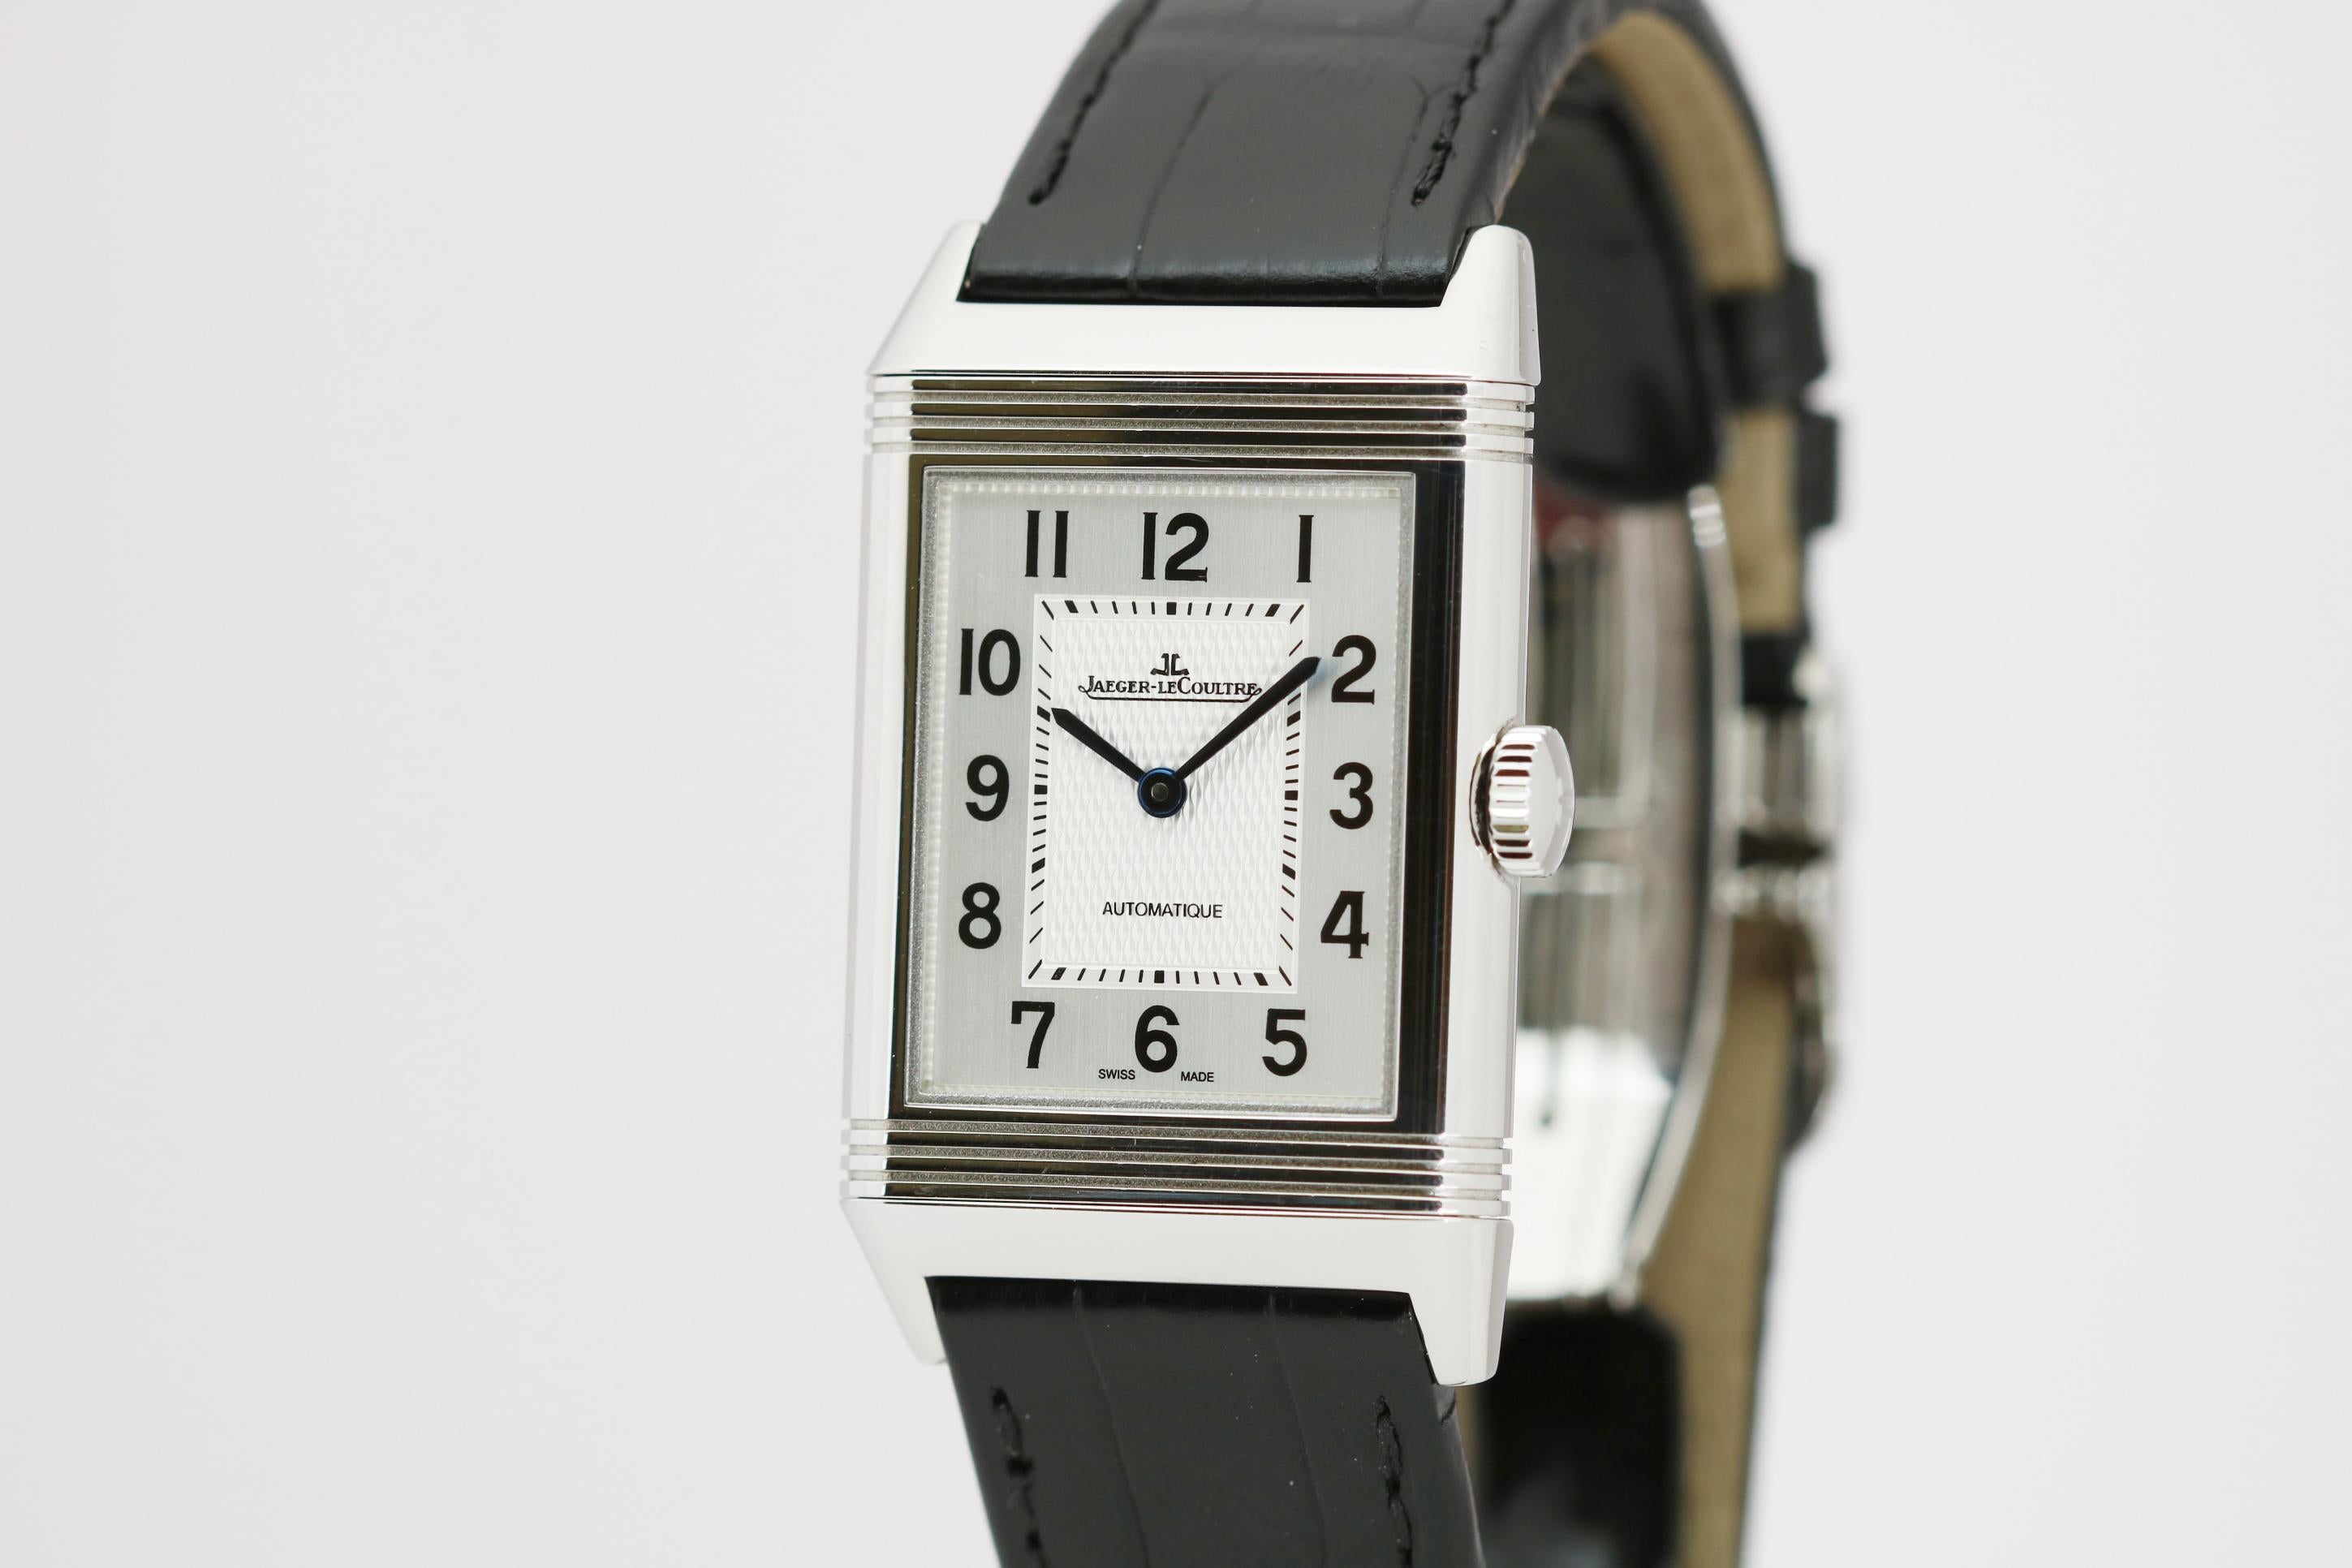 Jaeger LeCoultre Stainless Steel Classic Reverso Automatic reference Q2538420 with a black alligtor strap on a JleC double deployant clasp. Original retail was about $8,000 No box or papers.